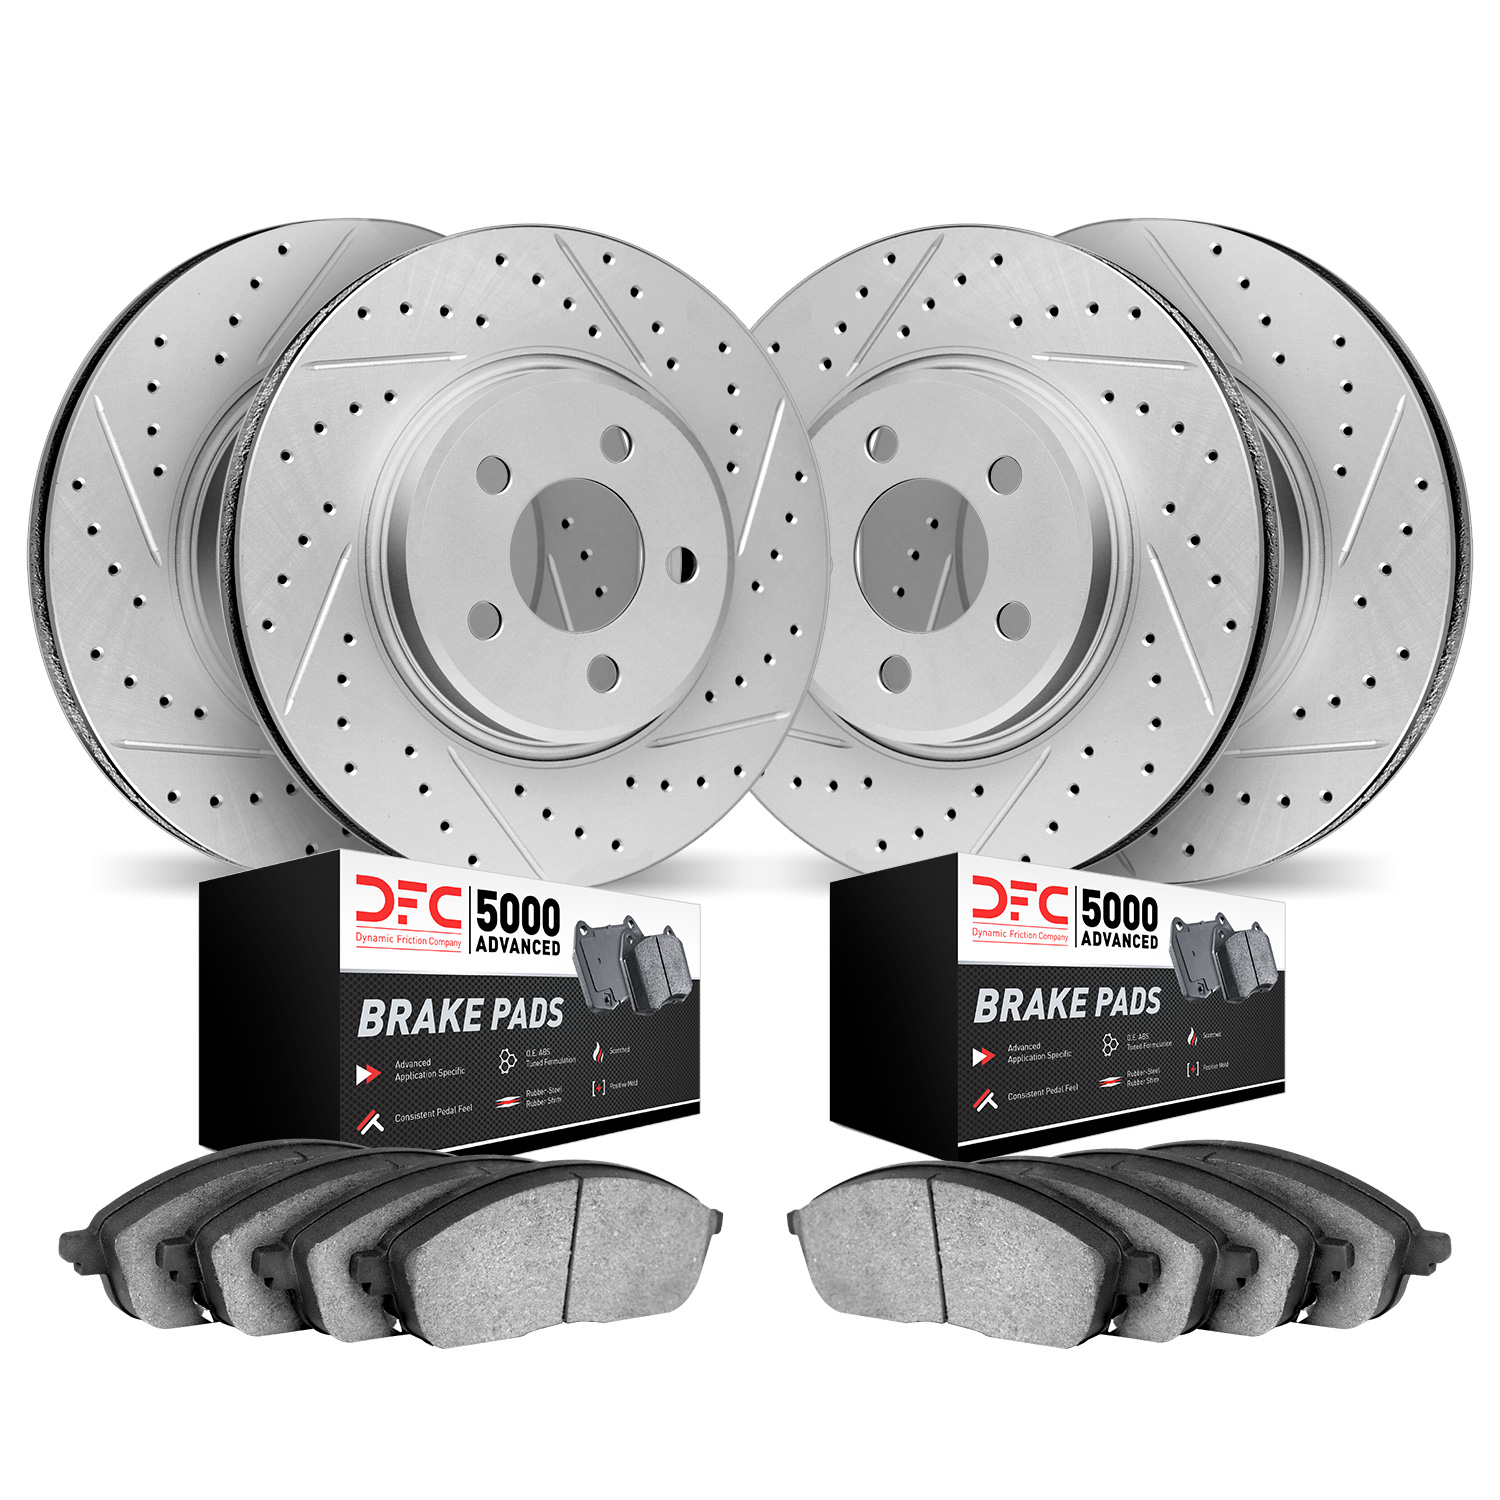 2504-20007 Geoperformance Drilled/Slotted Rotors w/5000 Advanced Brake Pads Kit, 2006-2008 Jaguar, Position: Front and Rear